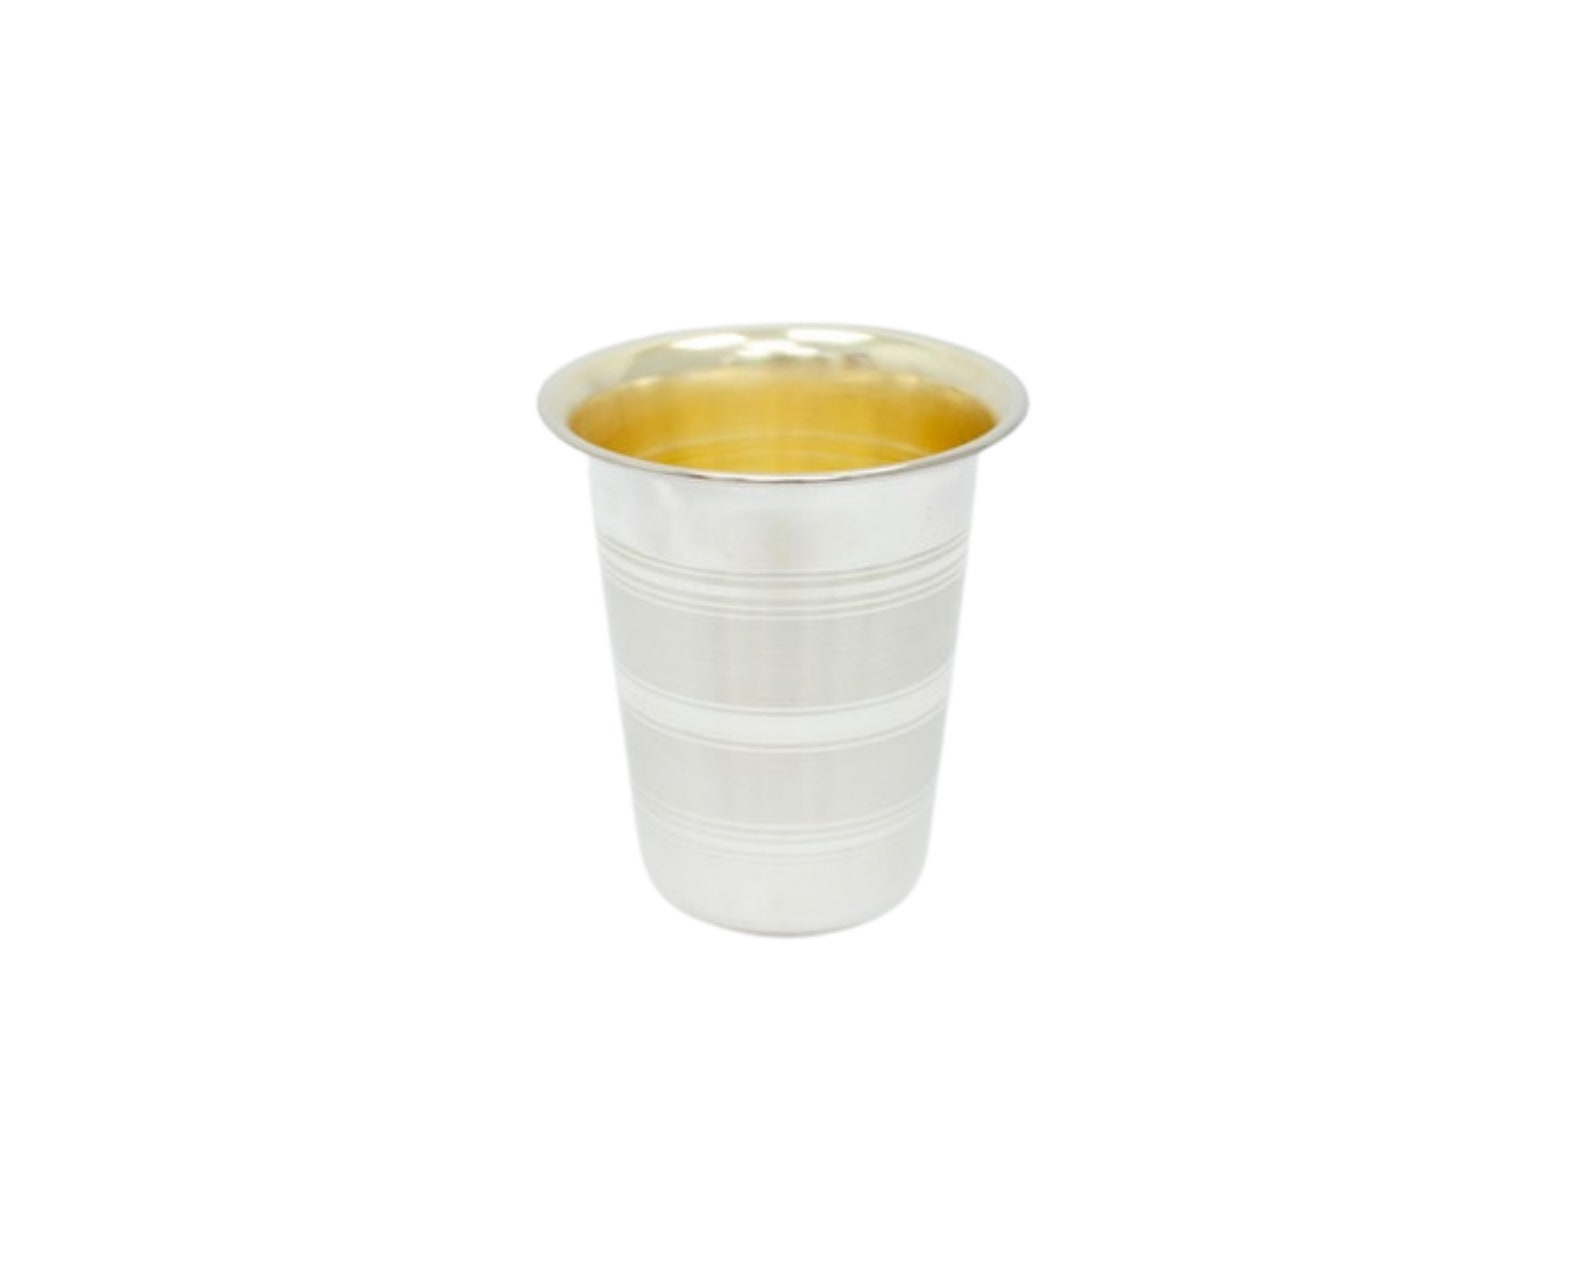 Modern design kiddush cup and plate